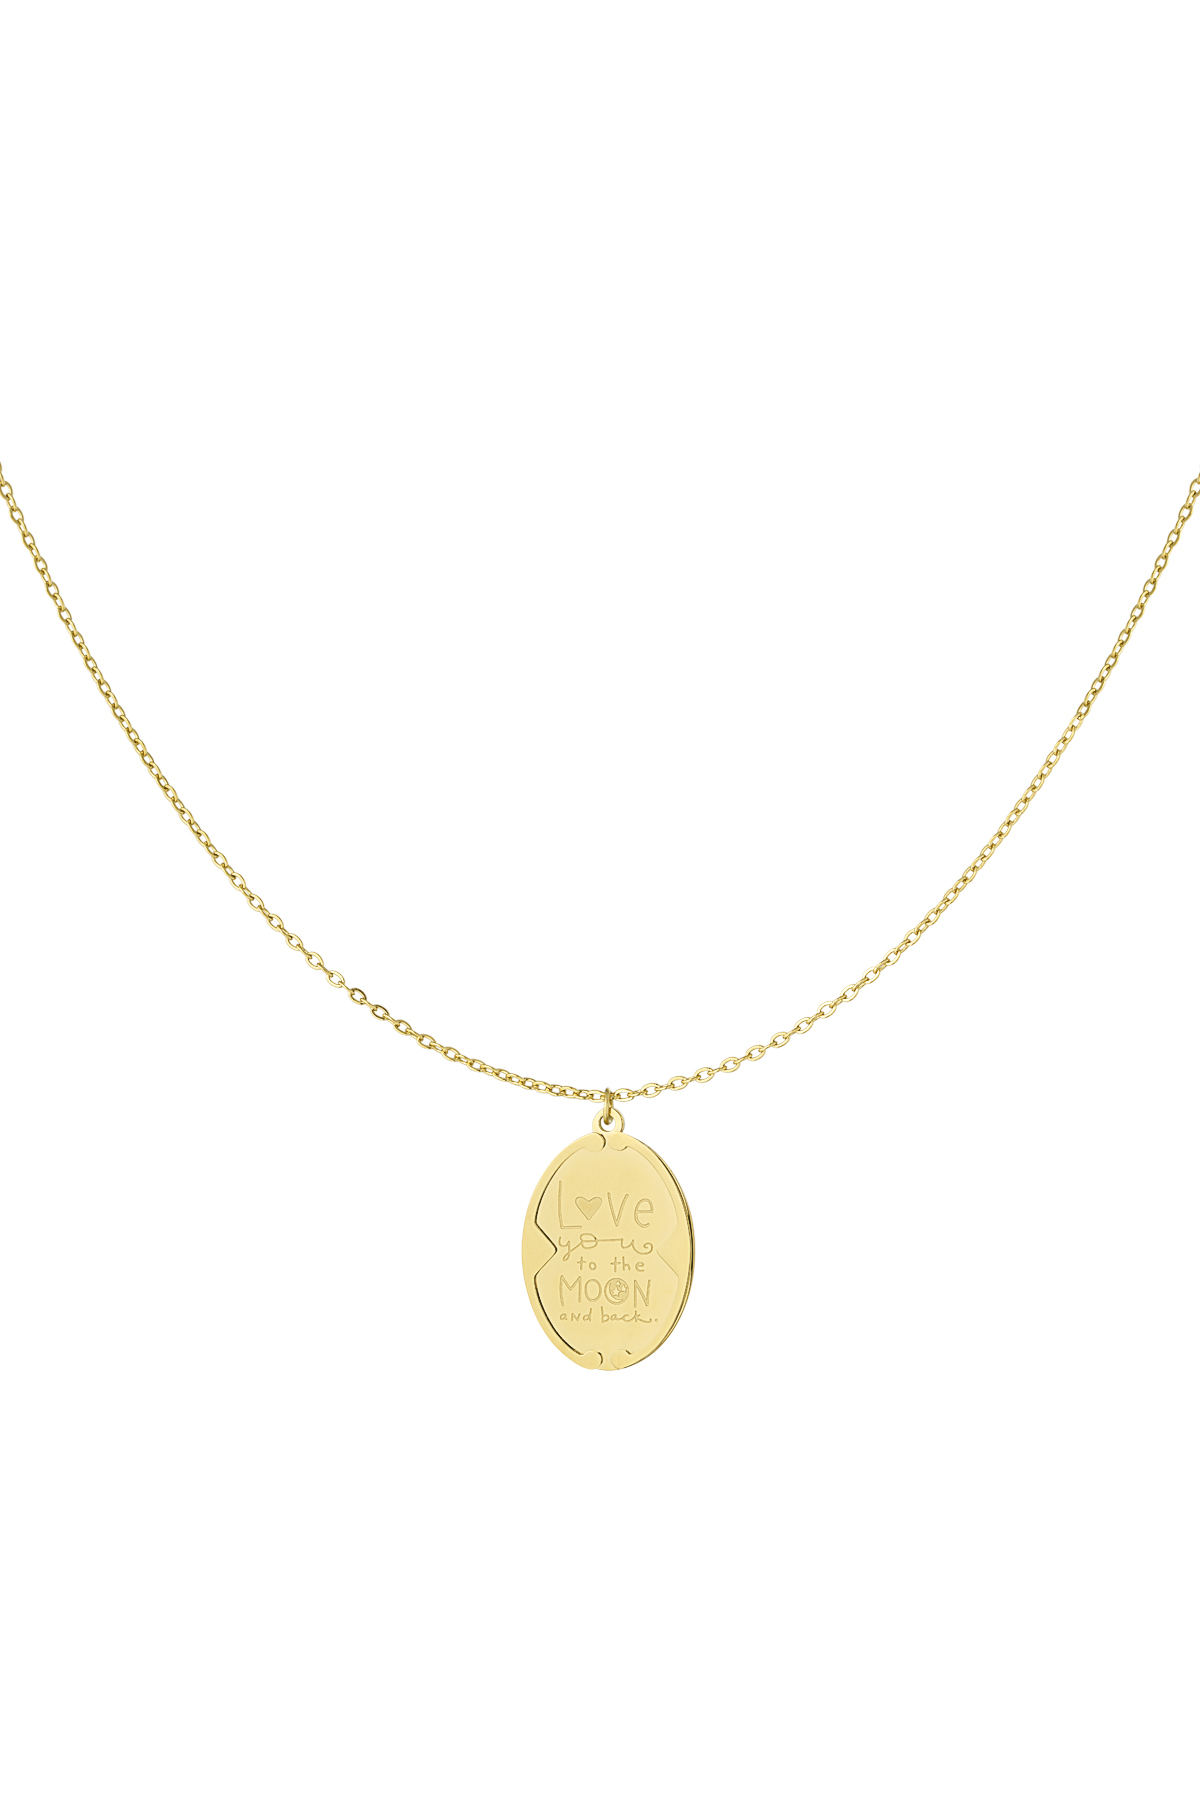 Love you to the moon and back necklace - gold  